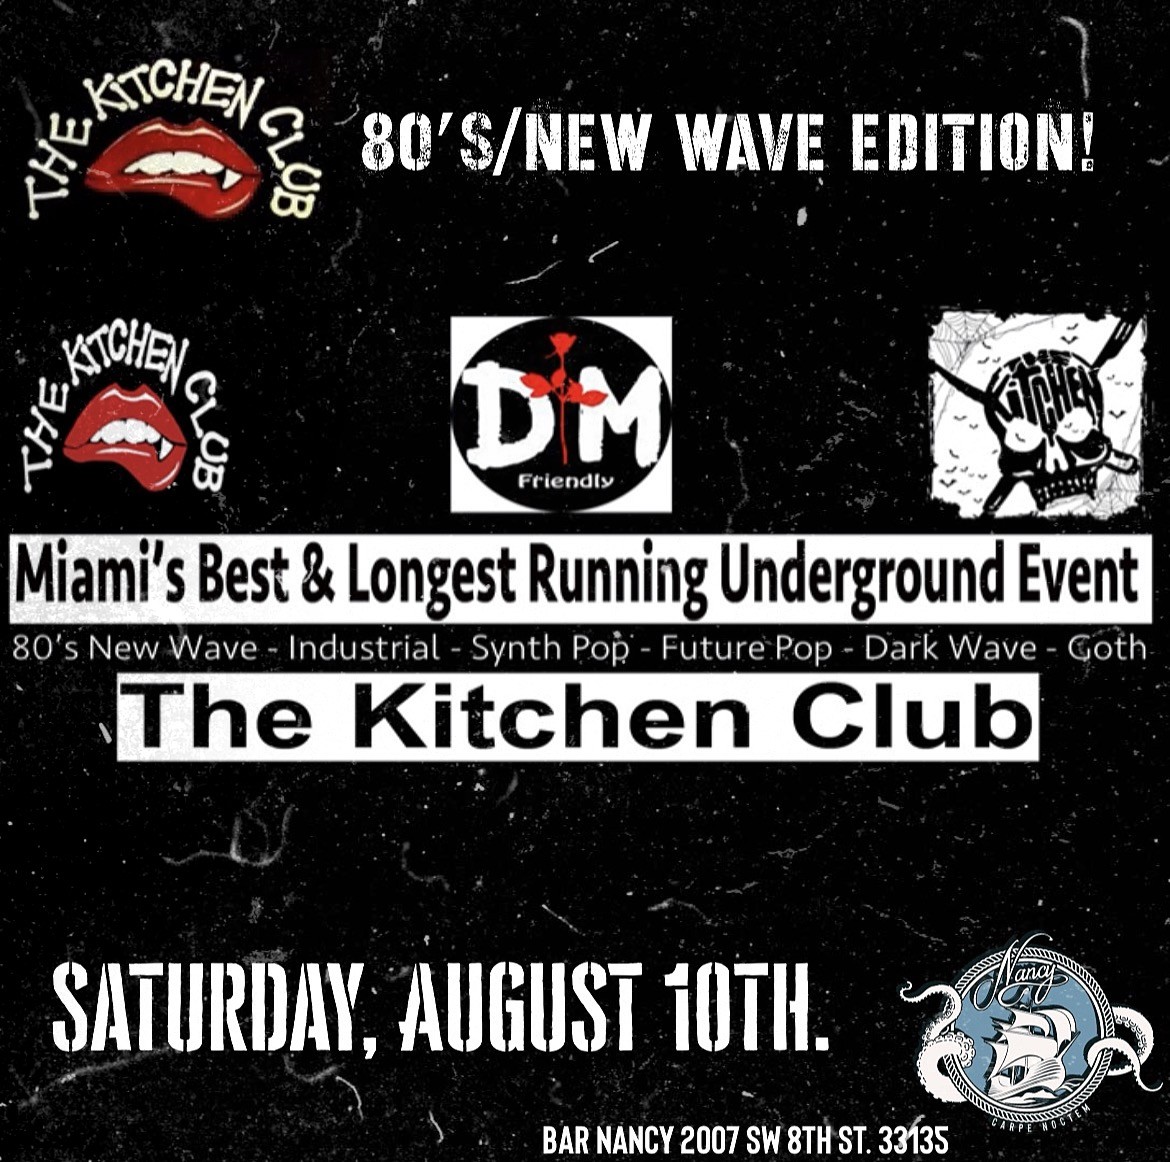 THE KITCHEN CLUB - 80'S NEW WAVE EDITION! AT BAR NANCY